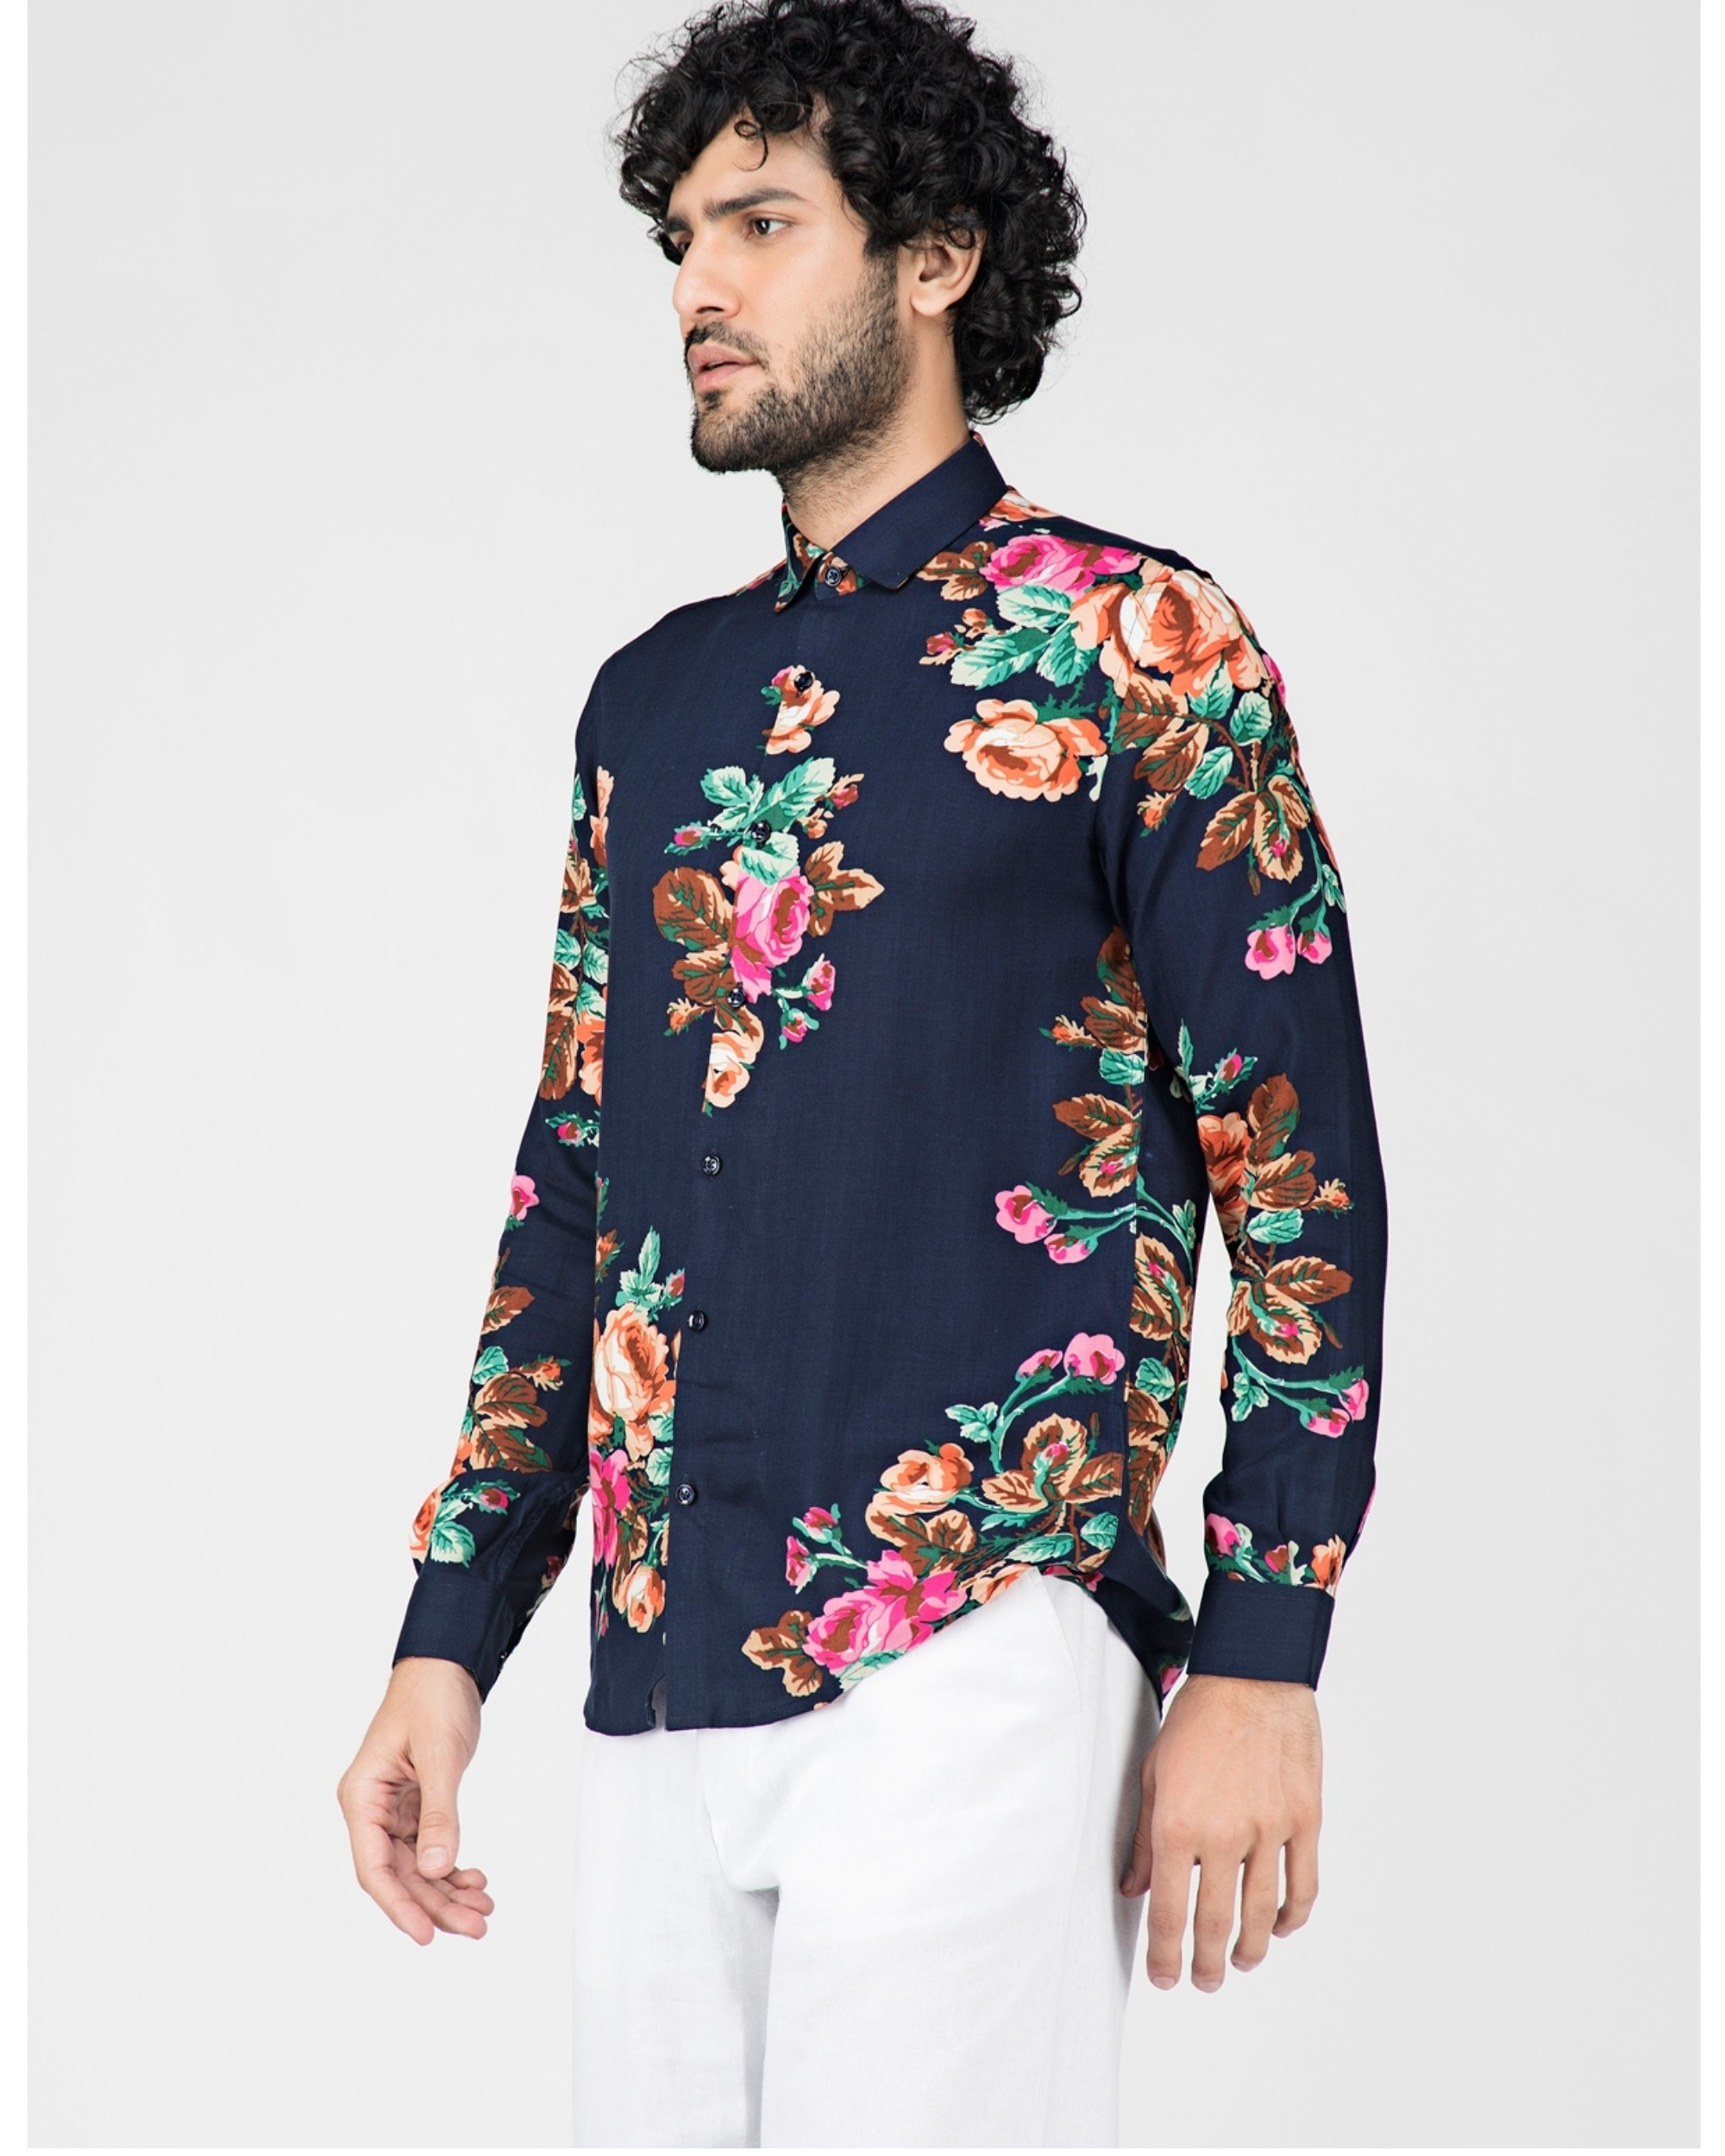 Navy blue floral printed casual shirt by Green Hill | The Secret Label